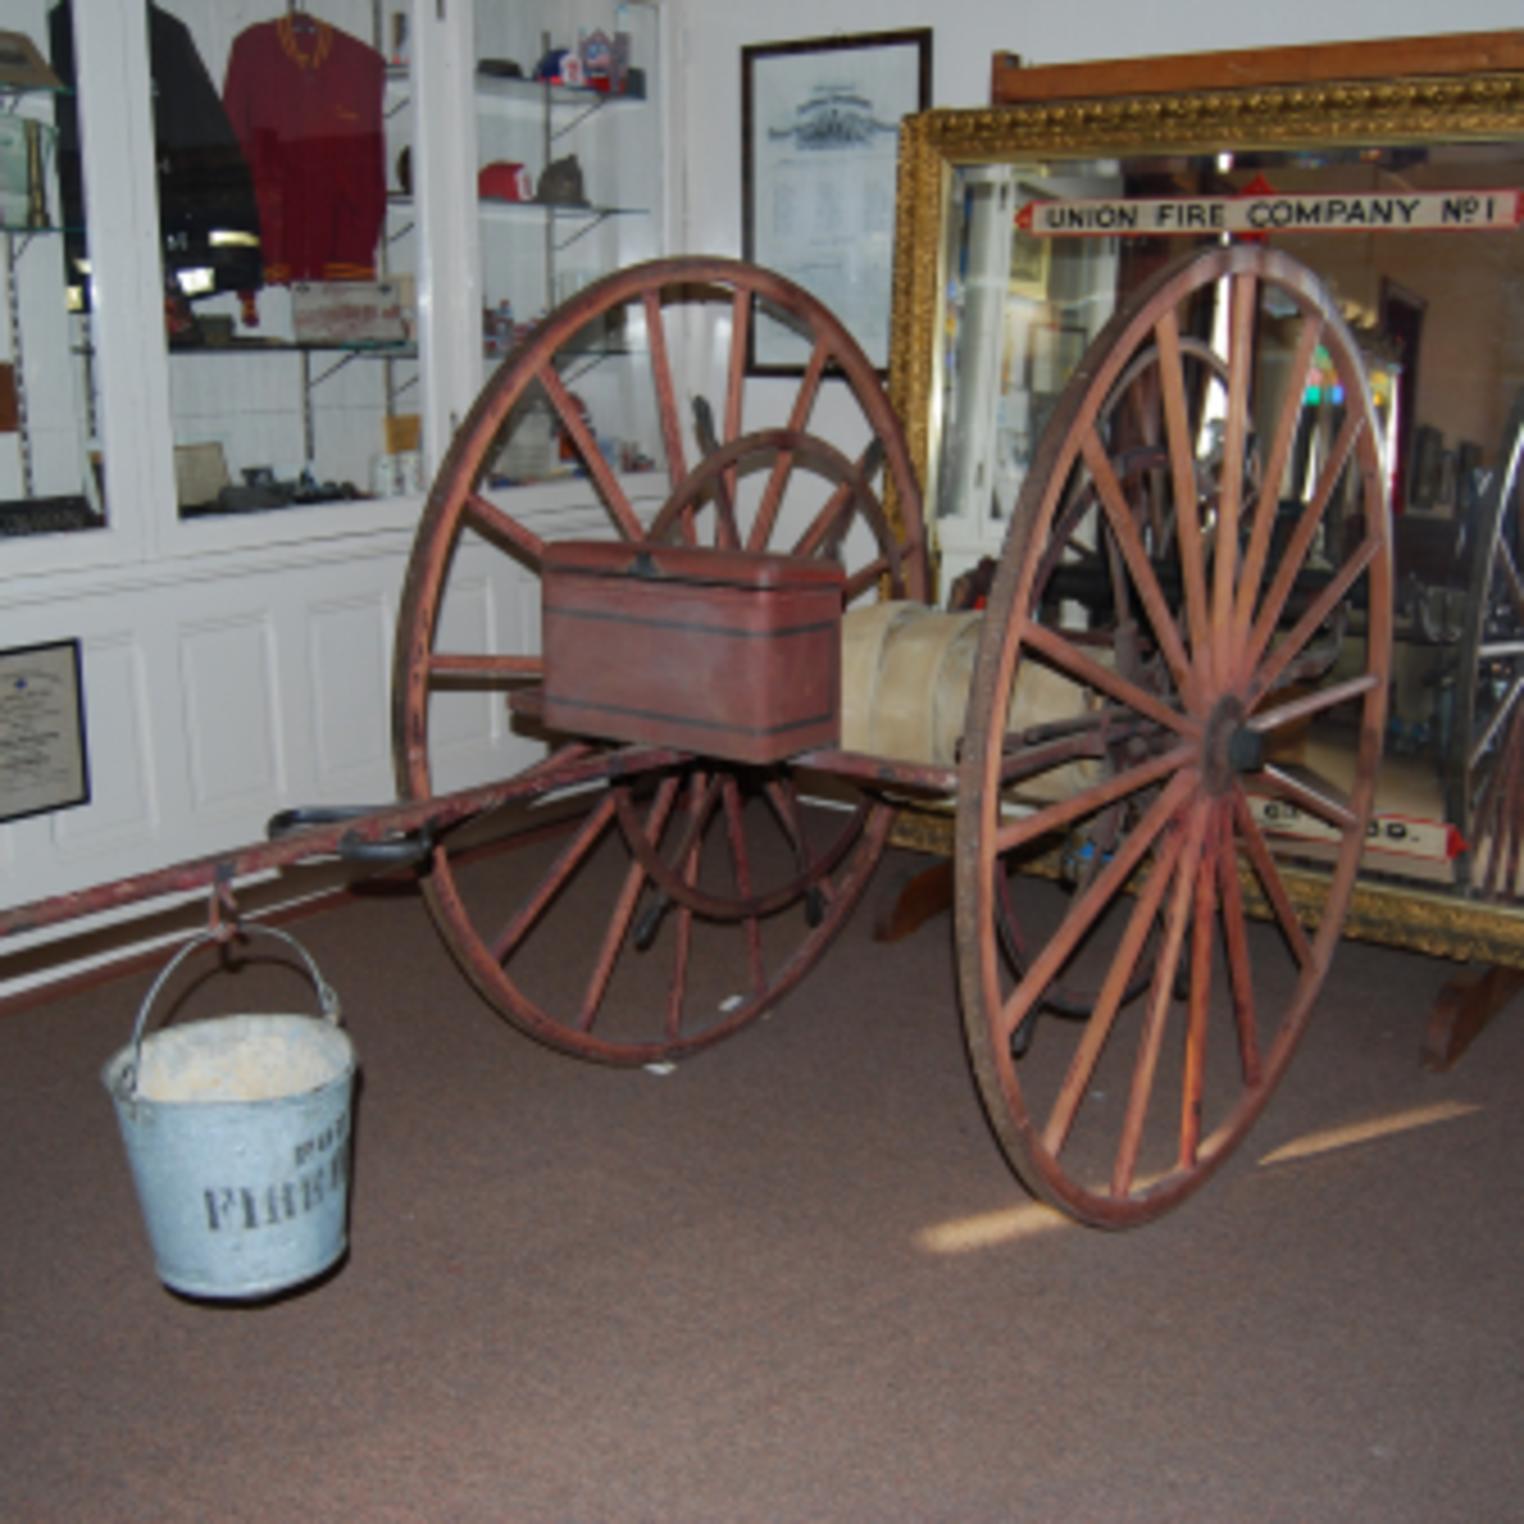 Exhibit at the Union Fire Company No. 1 Museum